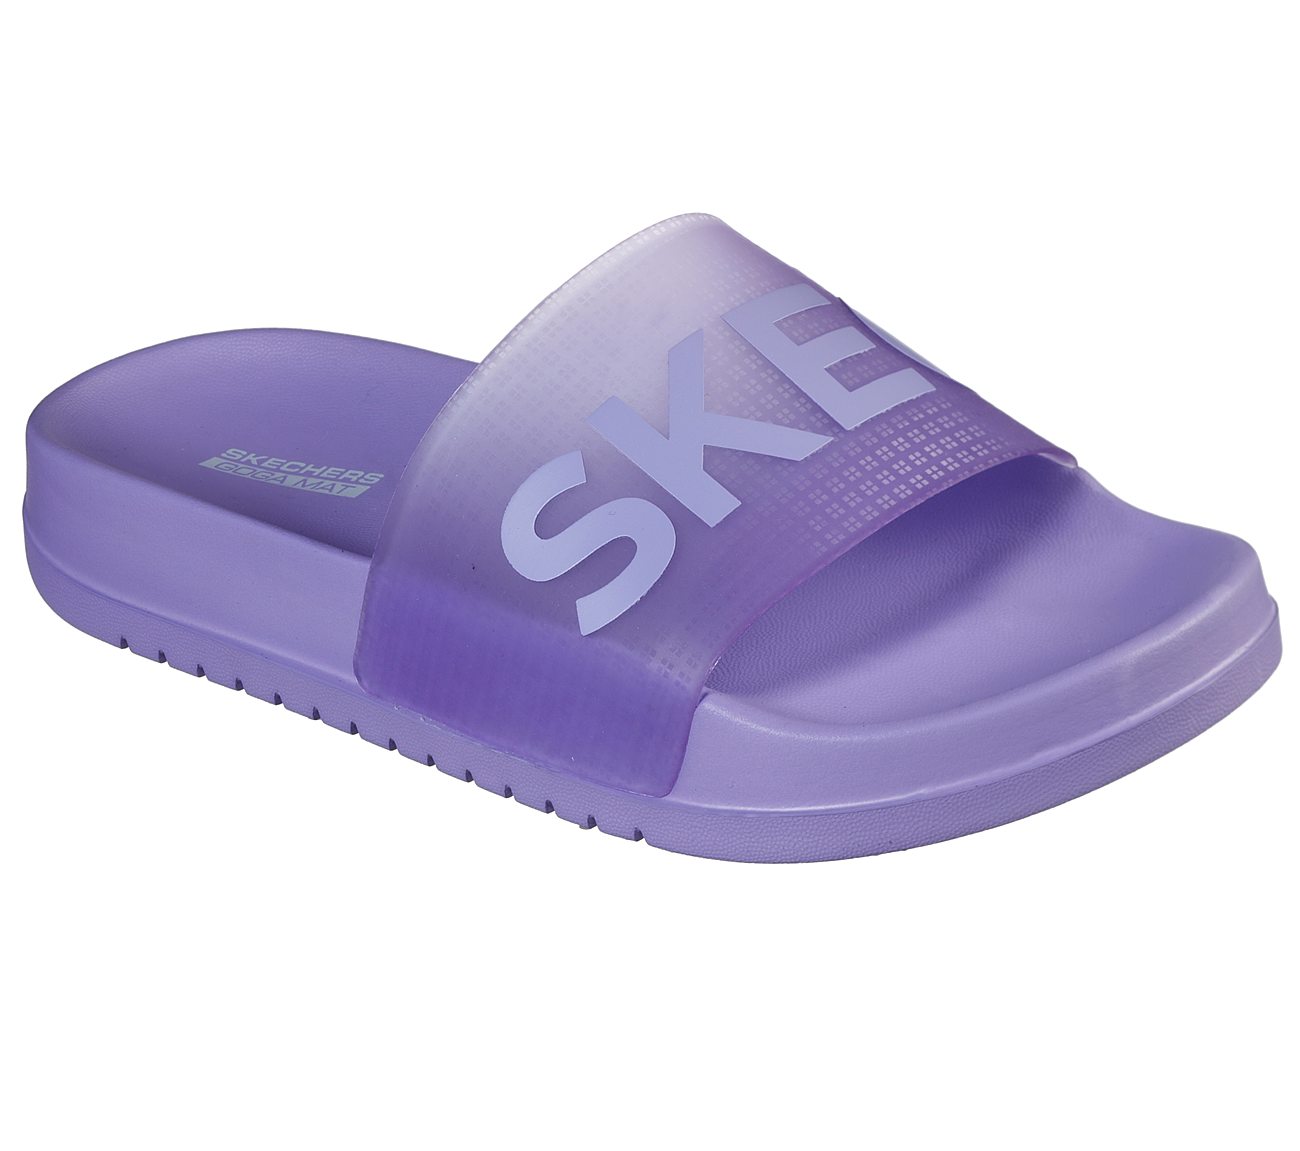 Skechers Jelly Flops on Sale, SAVE 30% -